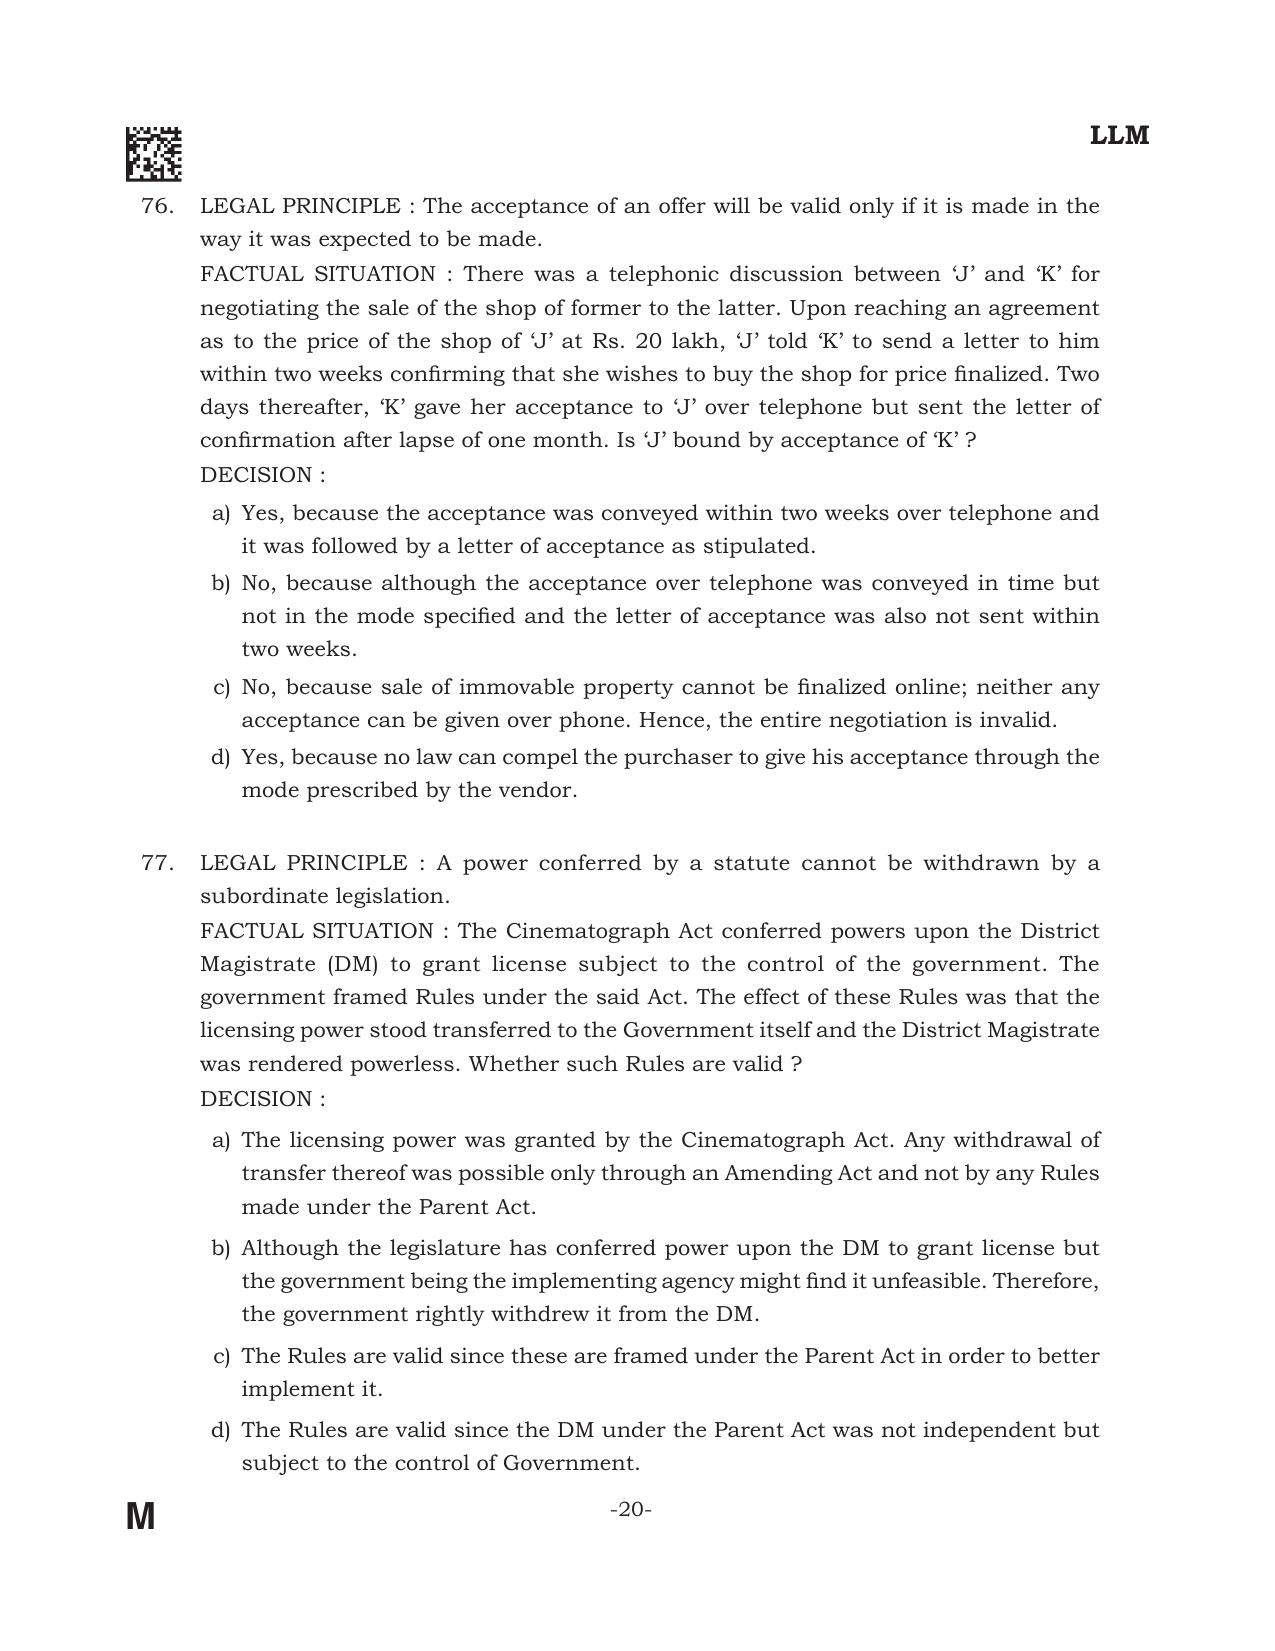 AILET 2022 Question Paper for LL.M - Page 20